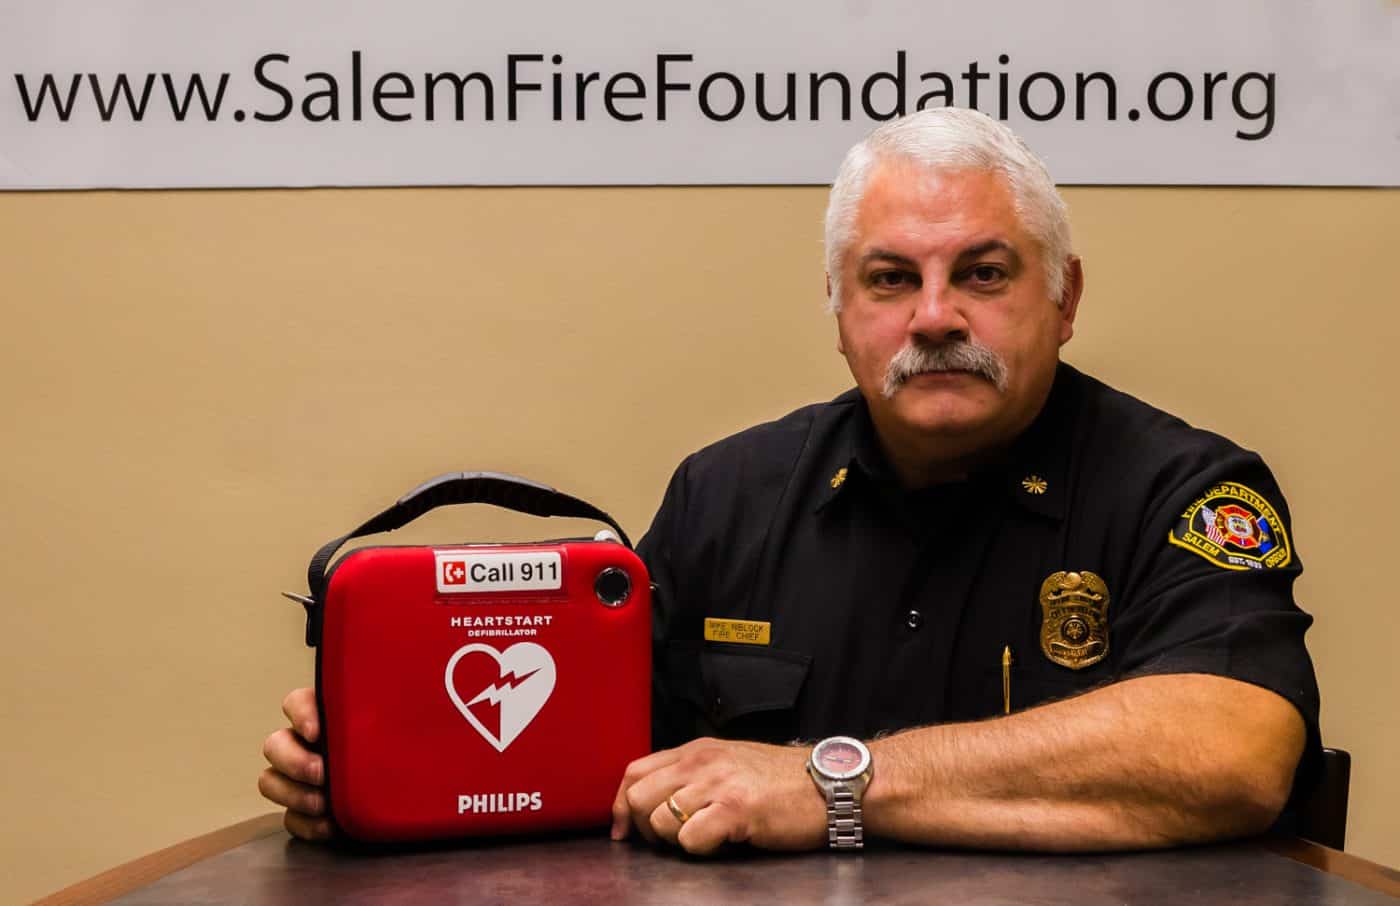 Newly Formed Salem Fire Foundation Aims to Save Lives in Salem